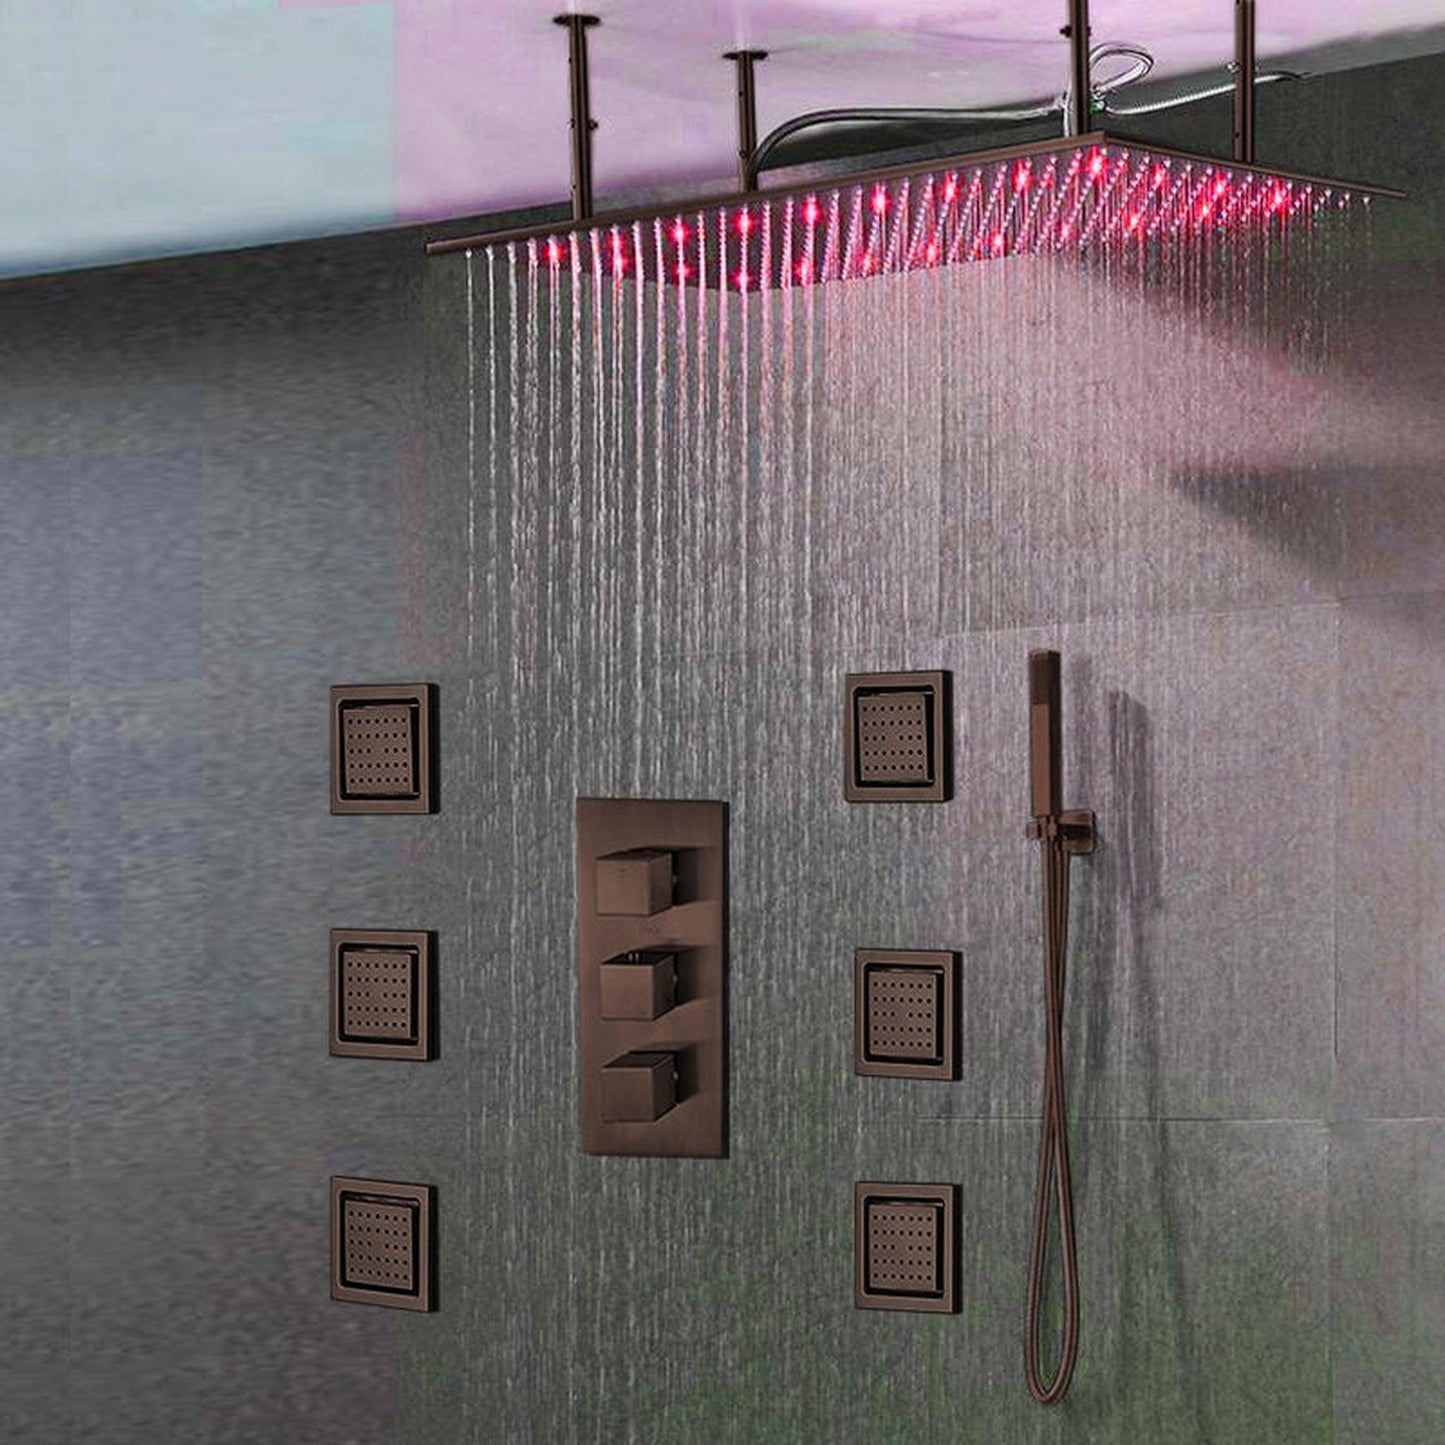 Fontana Martinique Creative Luxury Large Light Oil Rubbed Bronze Rectangular Ceiling Mounted LED Solid Brass Shower Head Rain Shower System With 6-Jet Body Sprays and Hand Shower